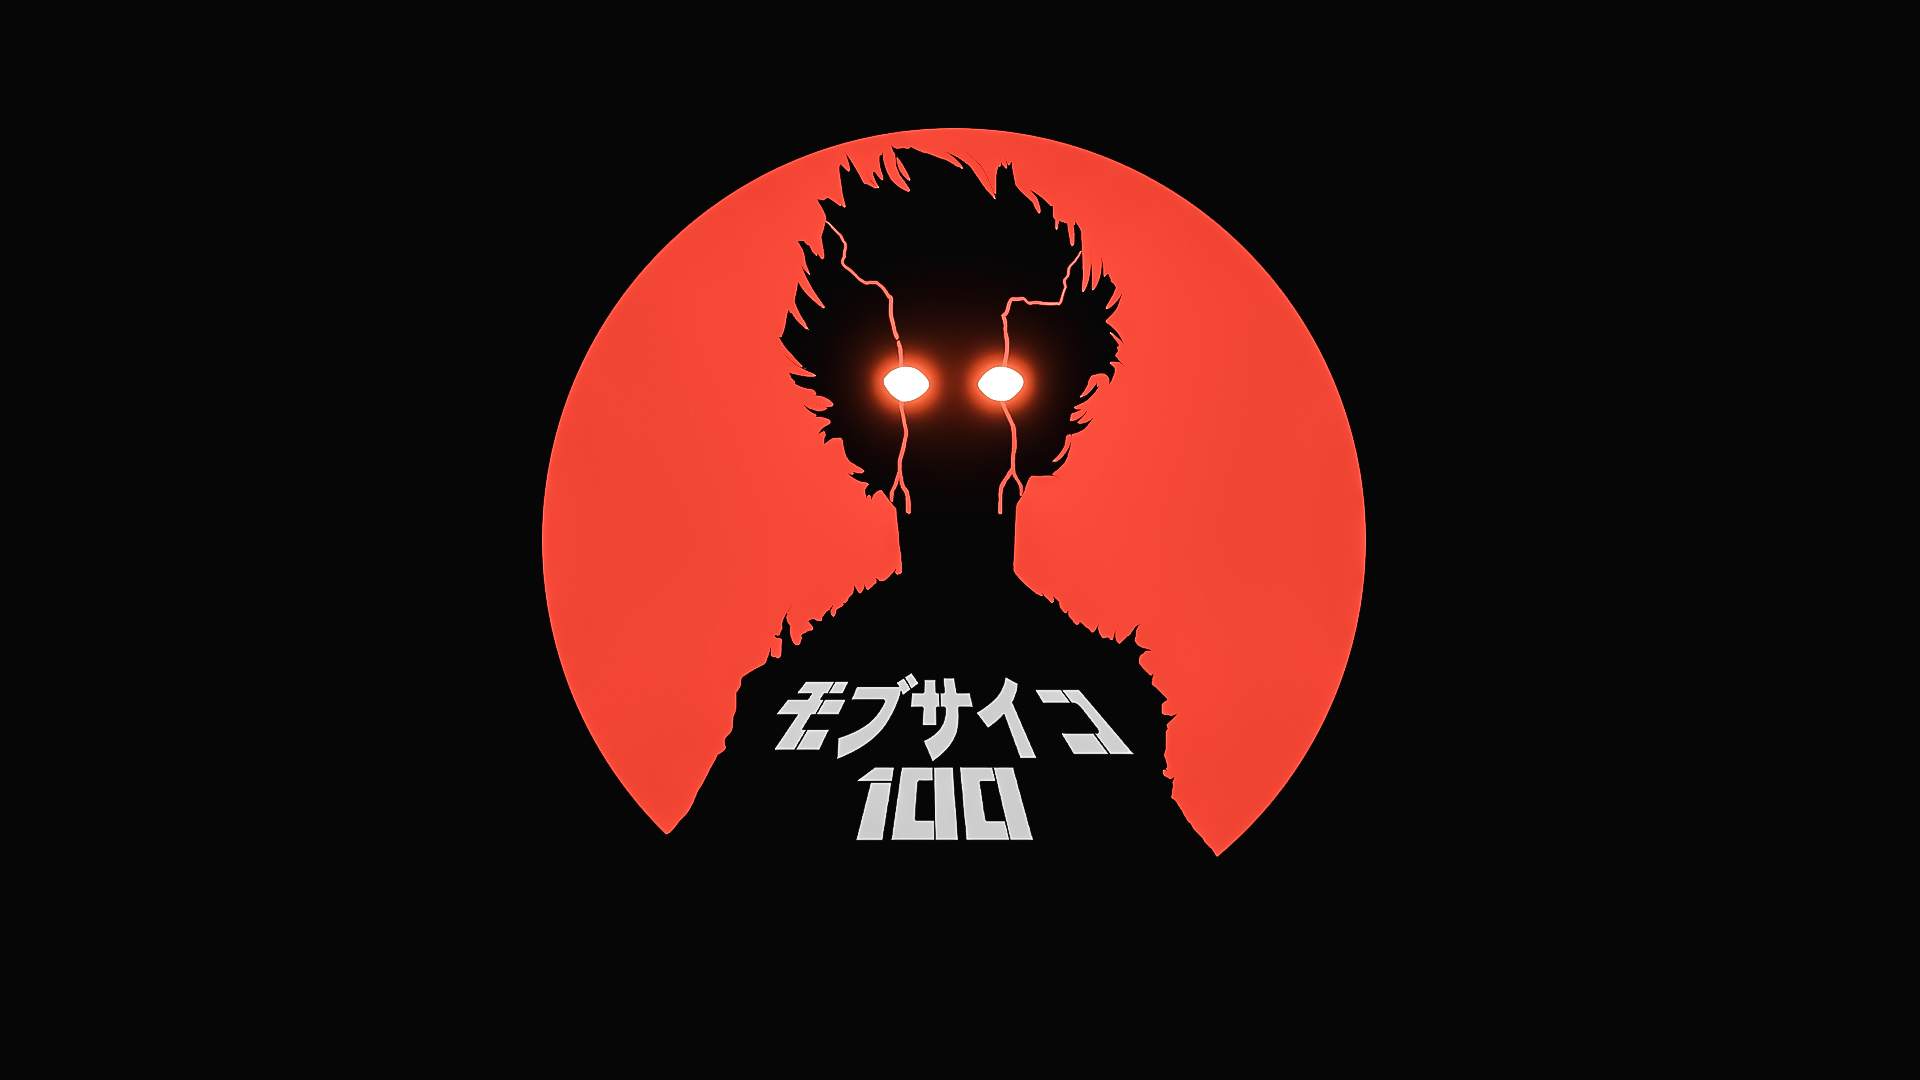 19x Mob Psycho 100 Cool Digital Art 19x Resolution Wallpaper Hd Minimalist 4k Wallpapers Images Photos And Background Wallpapers Den